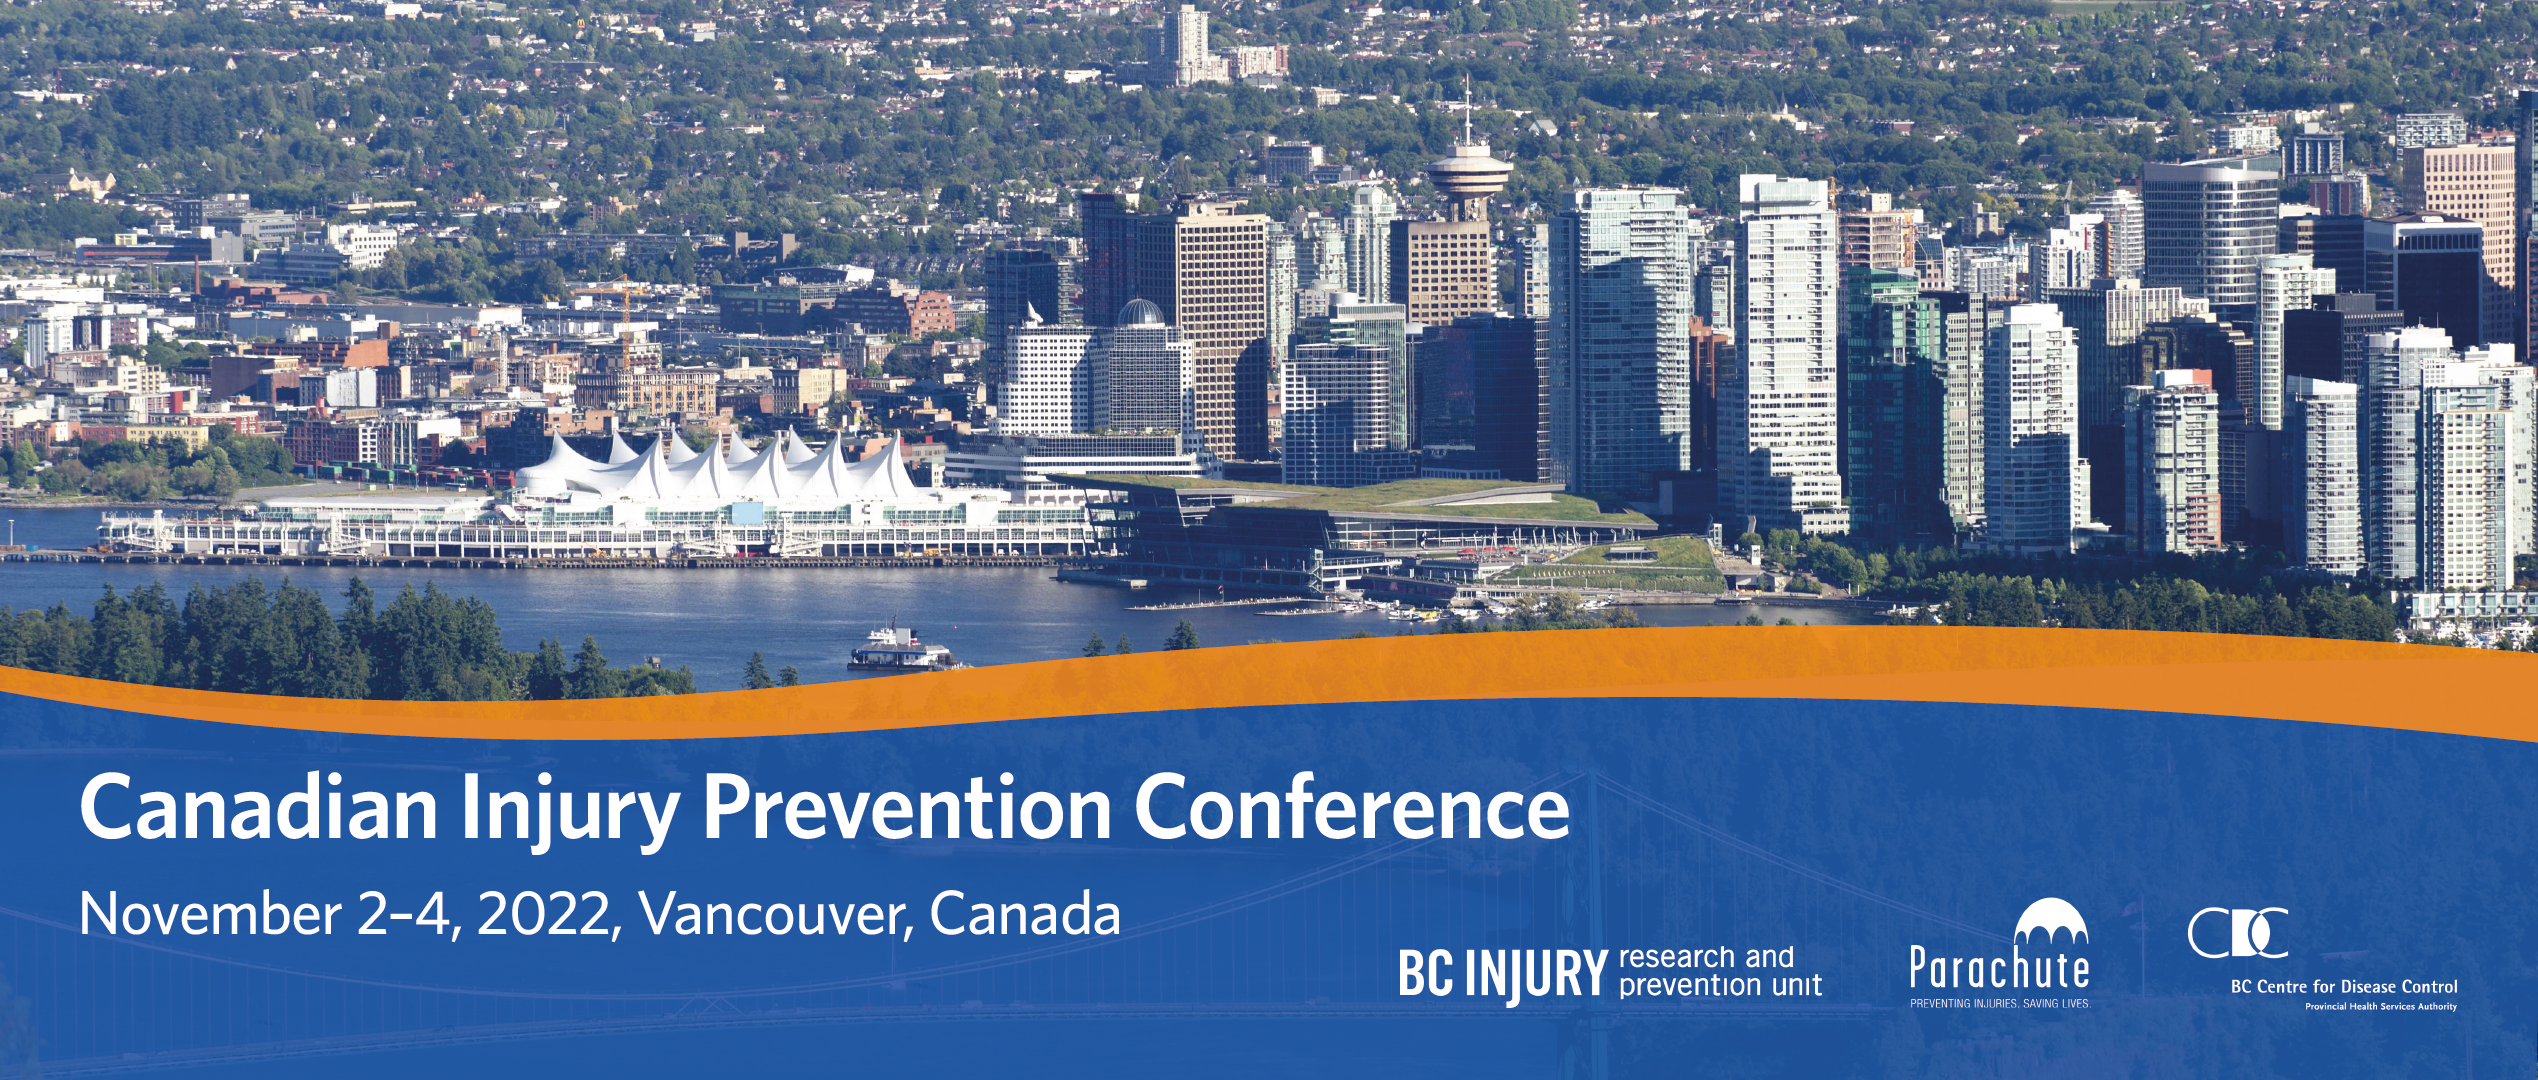 banner-canadian injury prevention conference